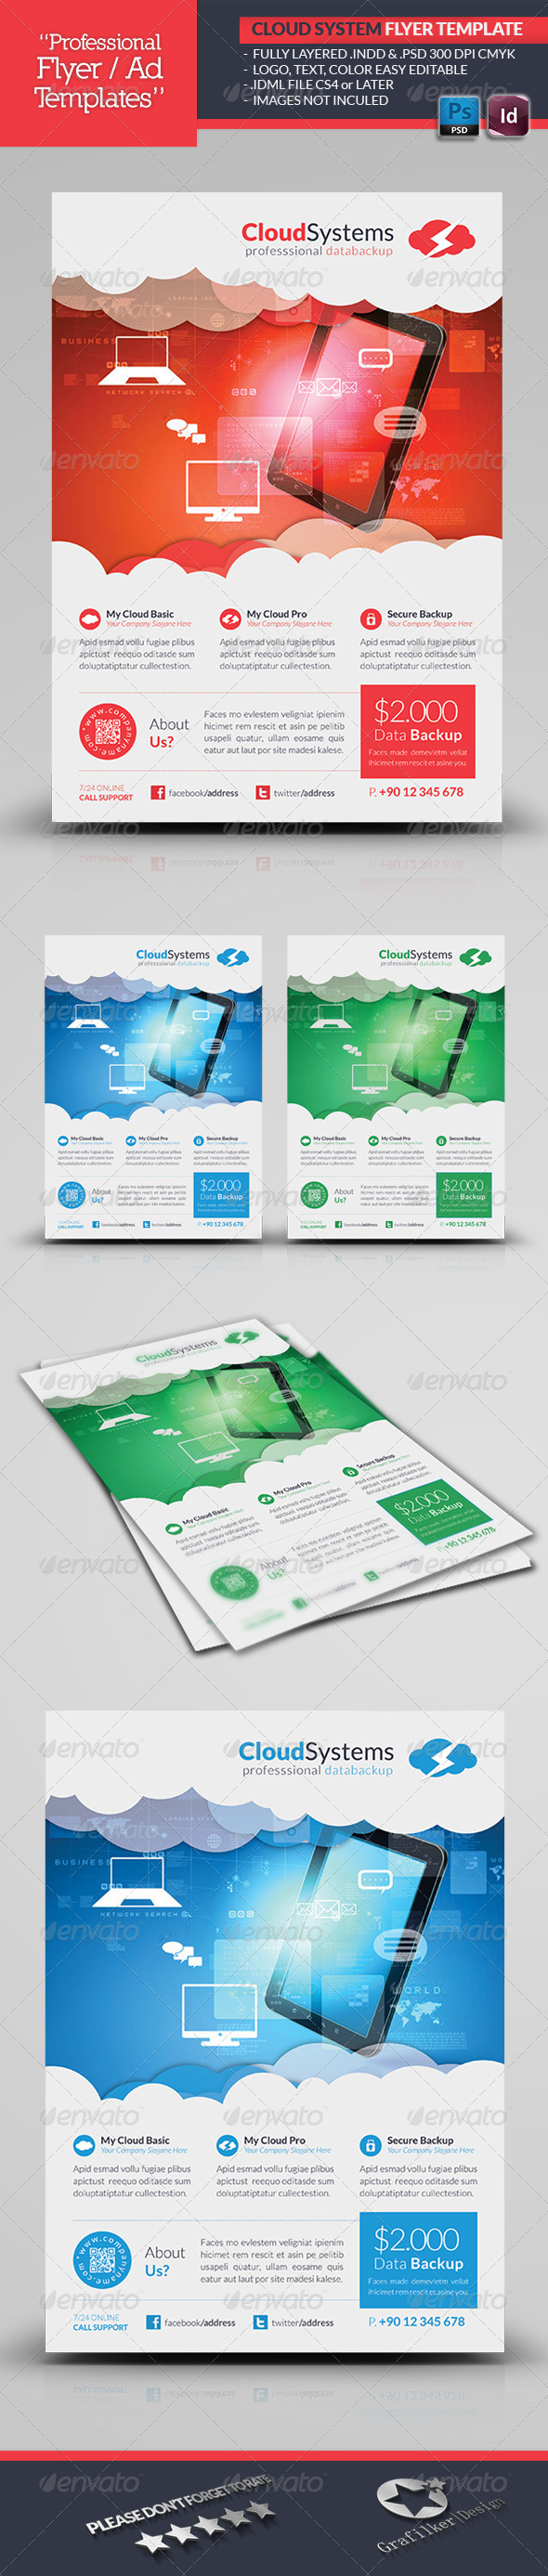 Cloud Systems Flyer Template